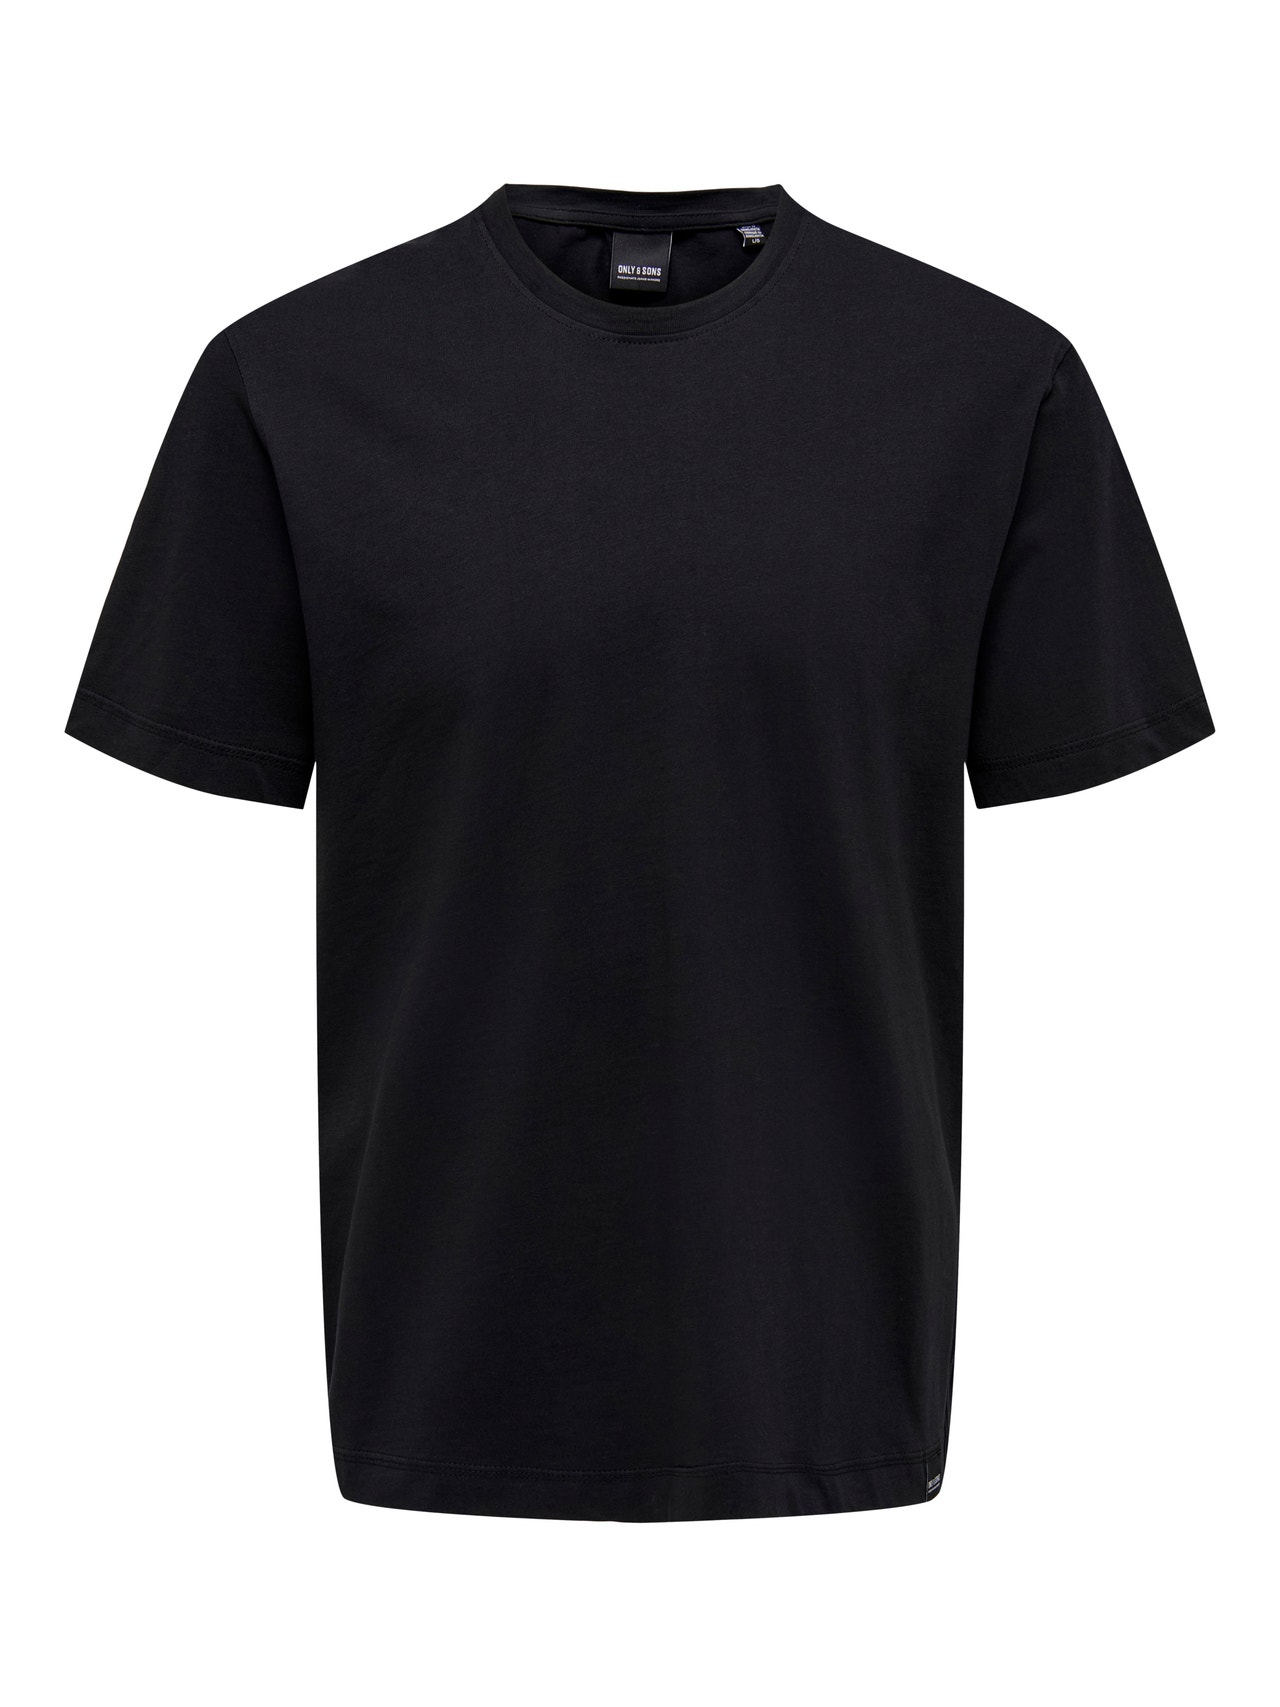 ONLY & SONS O-hals t-shirt -Black - 22025208